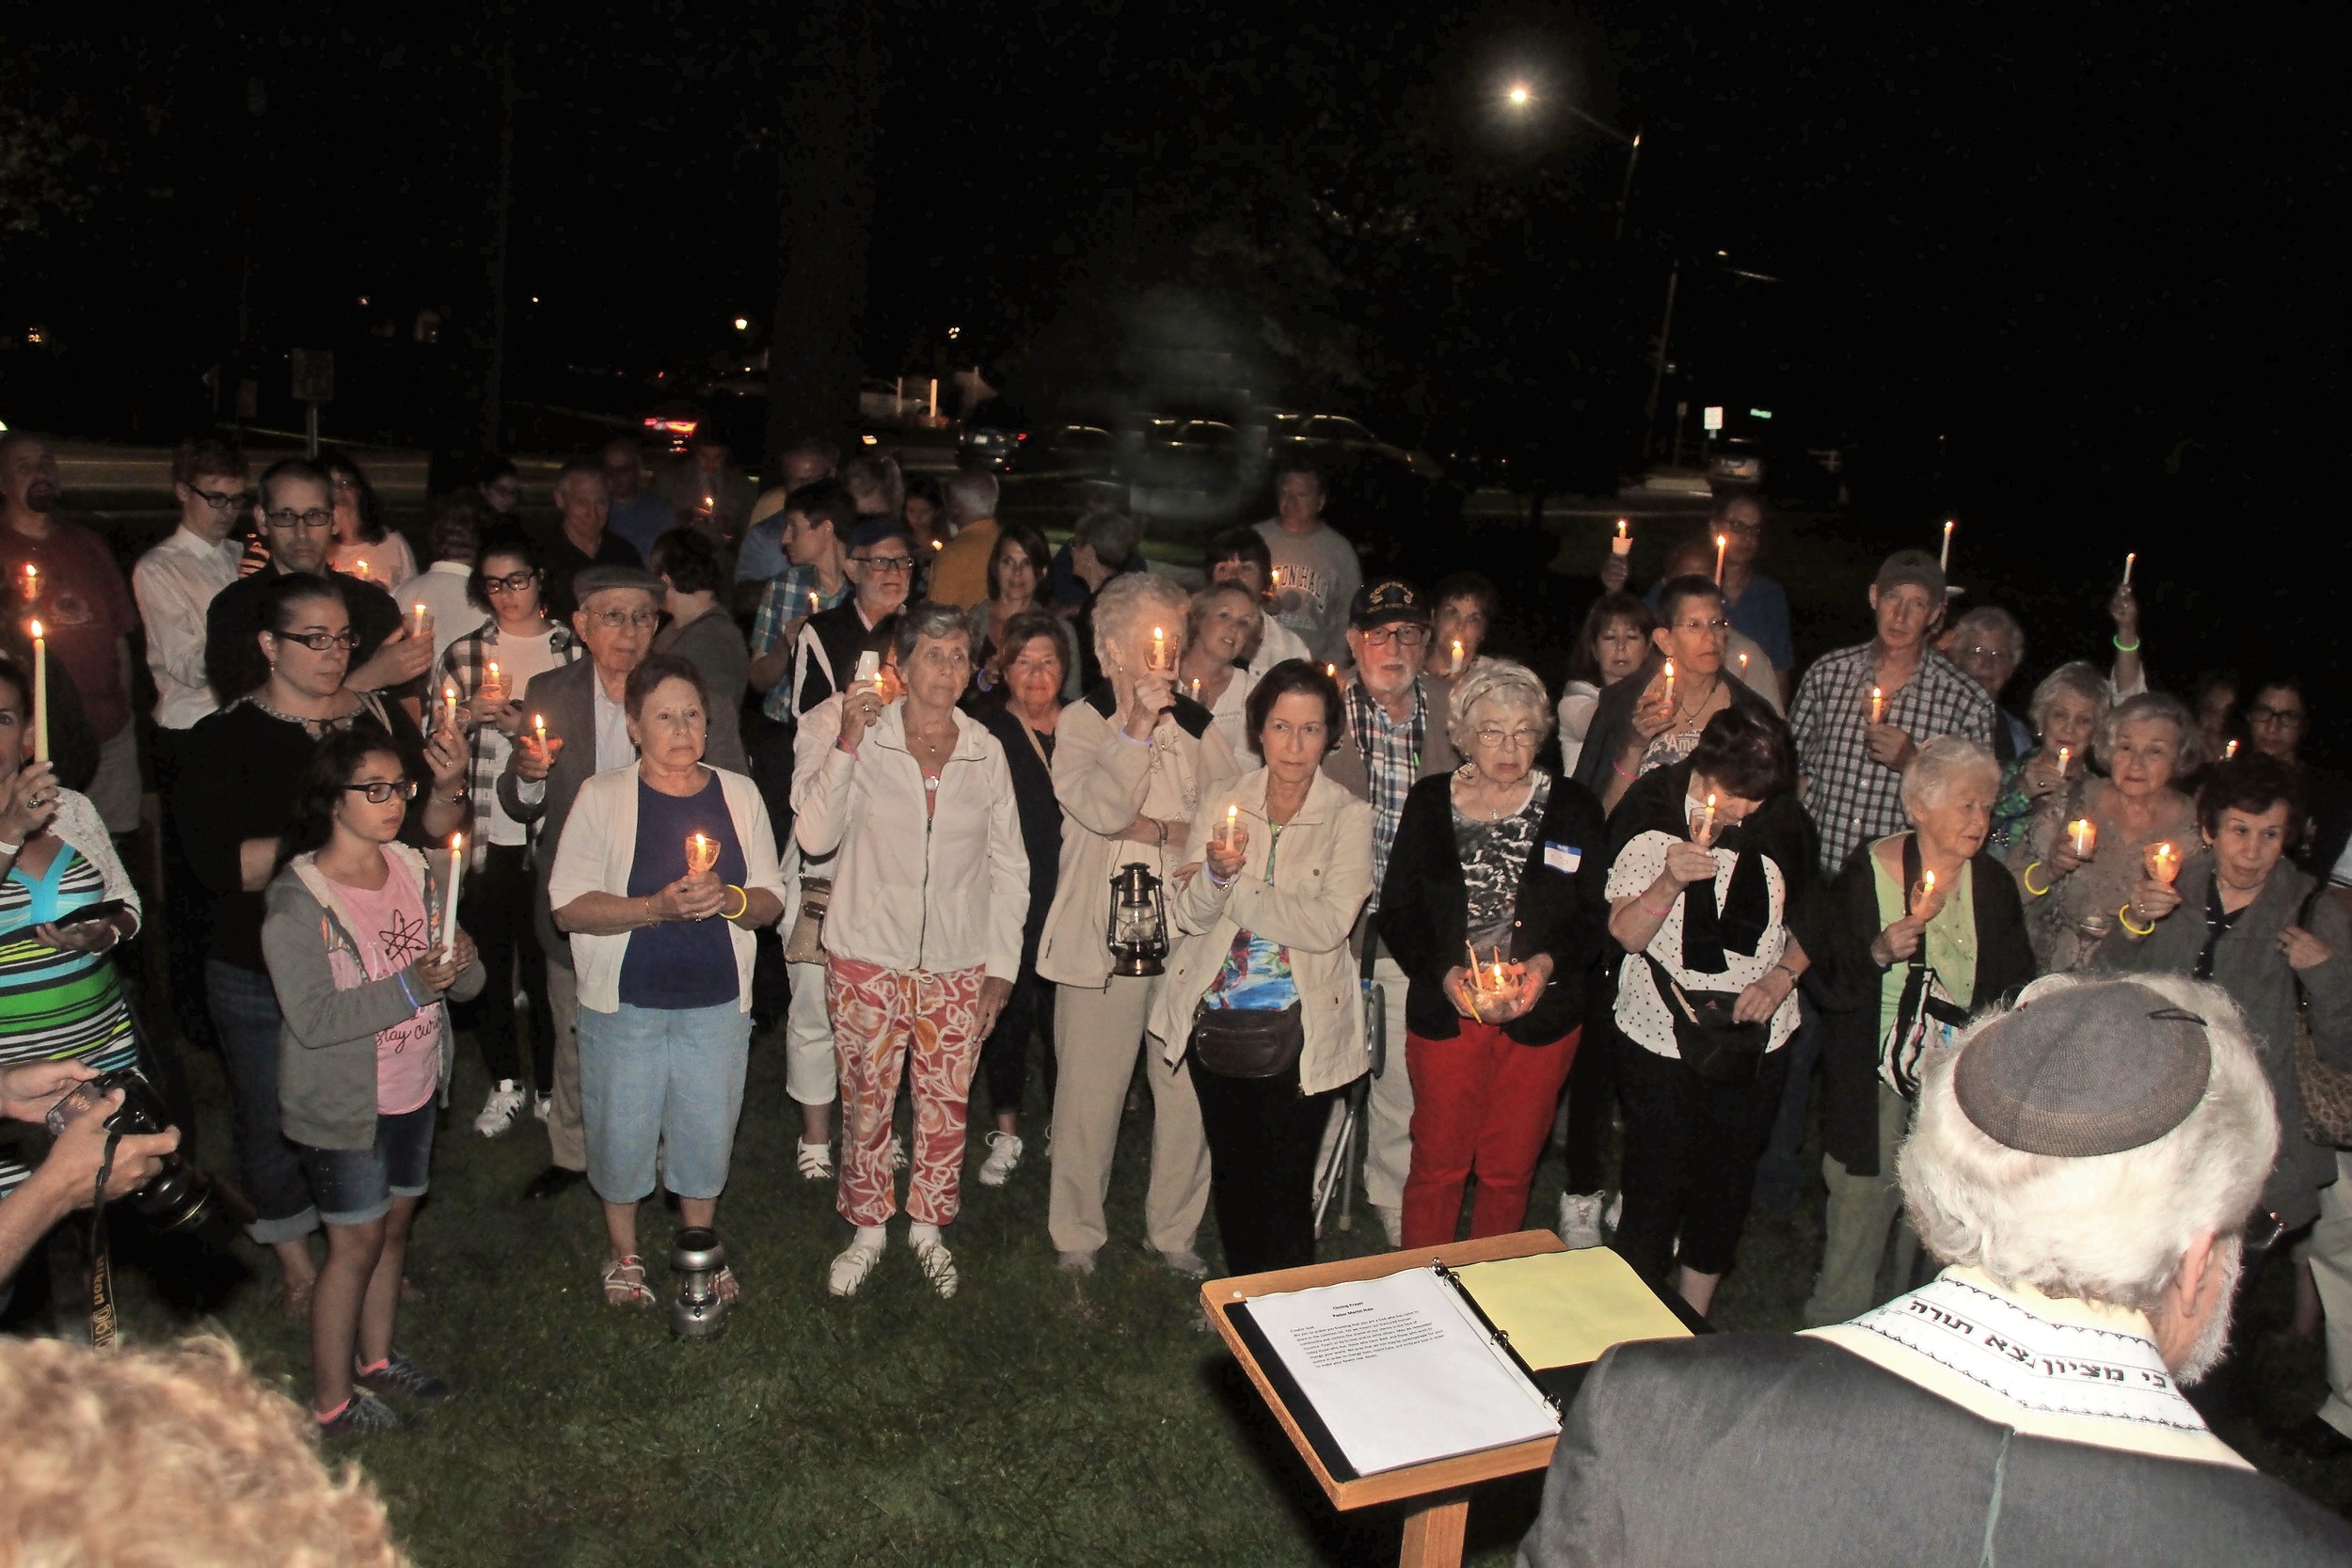 About 100 residents of Wantagh, Seaford, Bellmore, East Meadow and Levittown joined religious leaders at Wantagh Memorial Congregational Church on Aug. 26 for a vigil against hate, bigotry and prejudice.